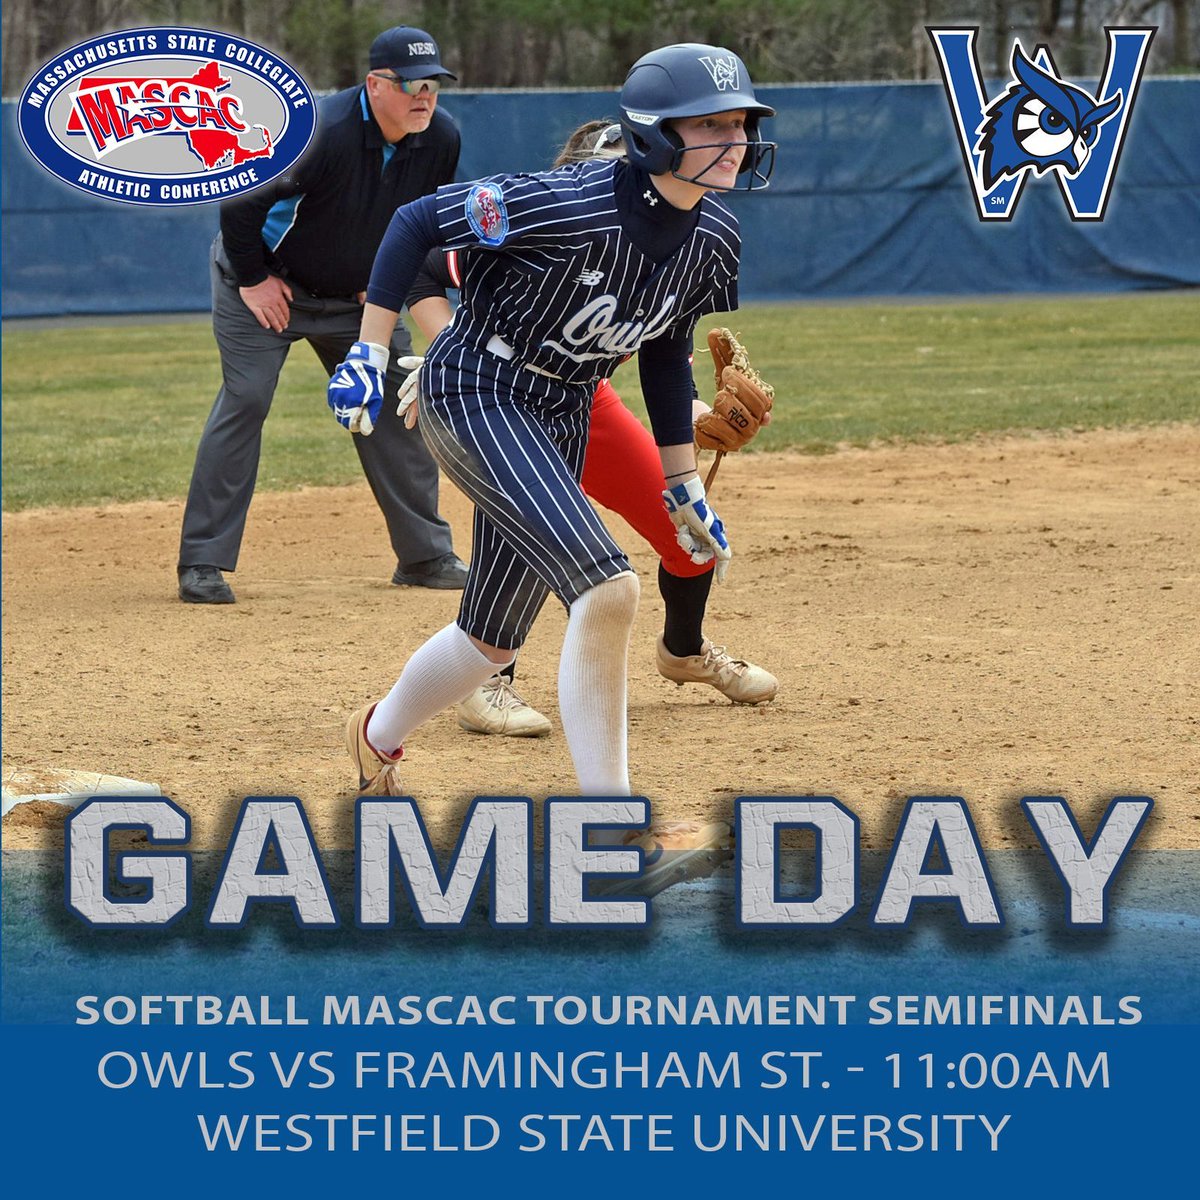 A spot in the MASCAC Semifinals is on the line this morning as the top-seeded Owls take on second-seeded Framingham State at 11:00AM! The winner moves to Sunday's championship with the loser playing later in the day at 3:00pm. #LetsGoOwls #d3sb